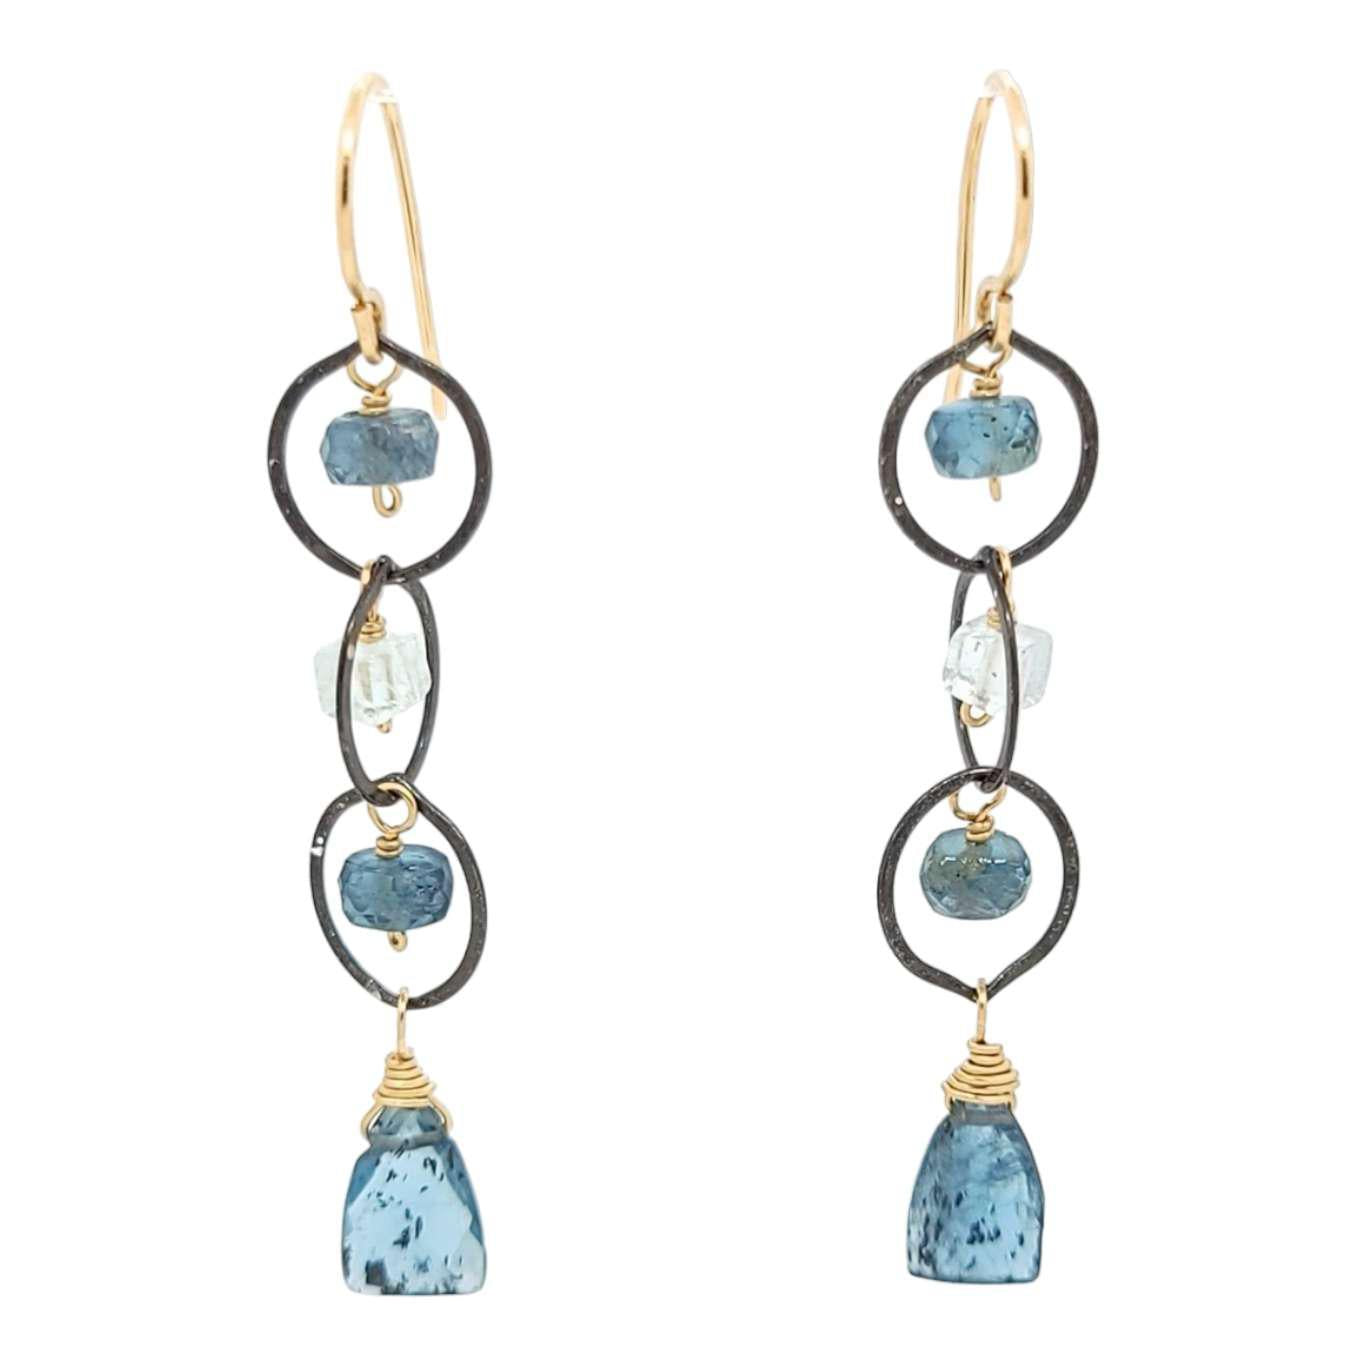 Earrings - Triple Circle Chain with Moss Kyanite and Aquamarine by Calliope Jewelry